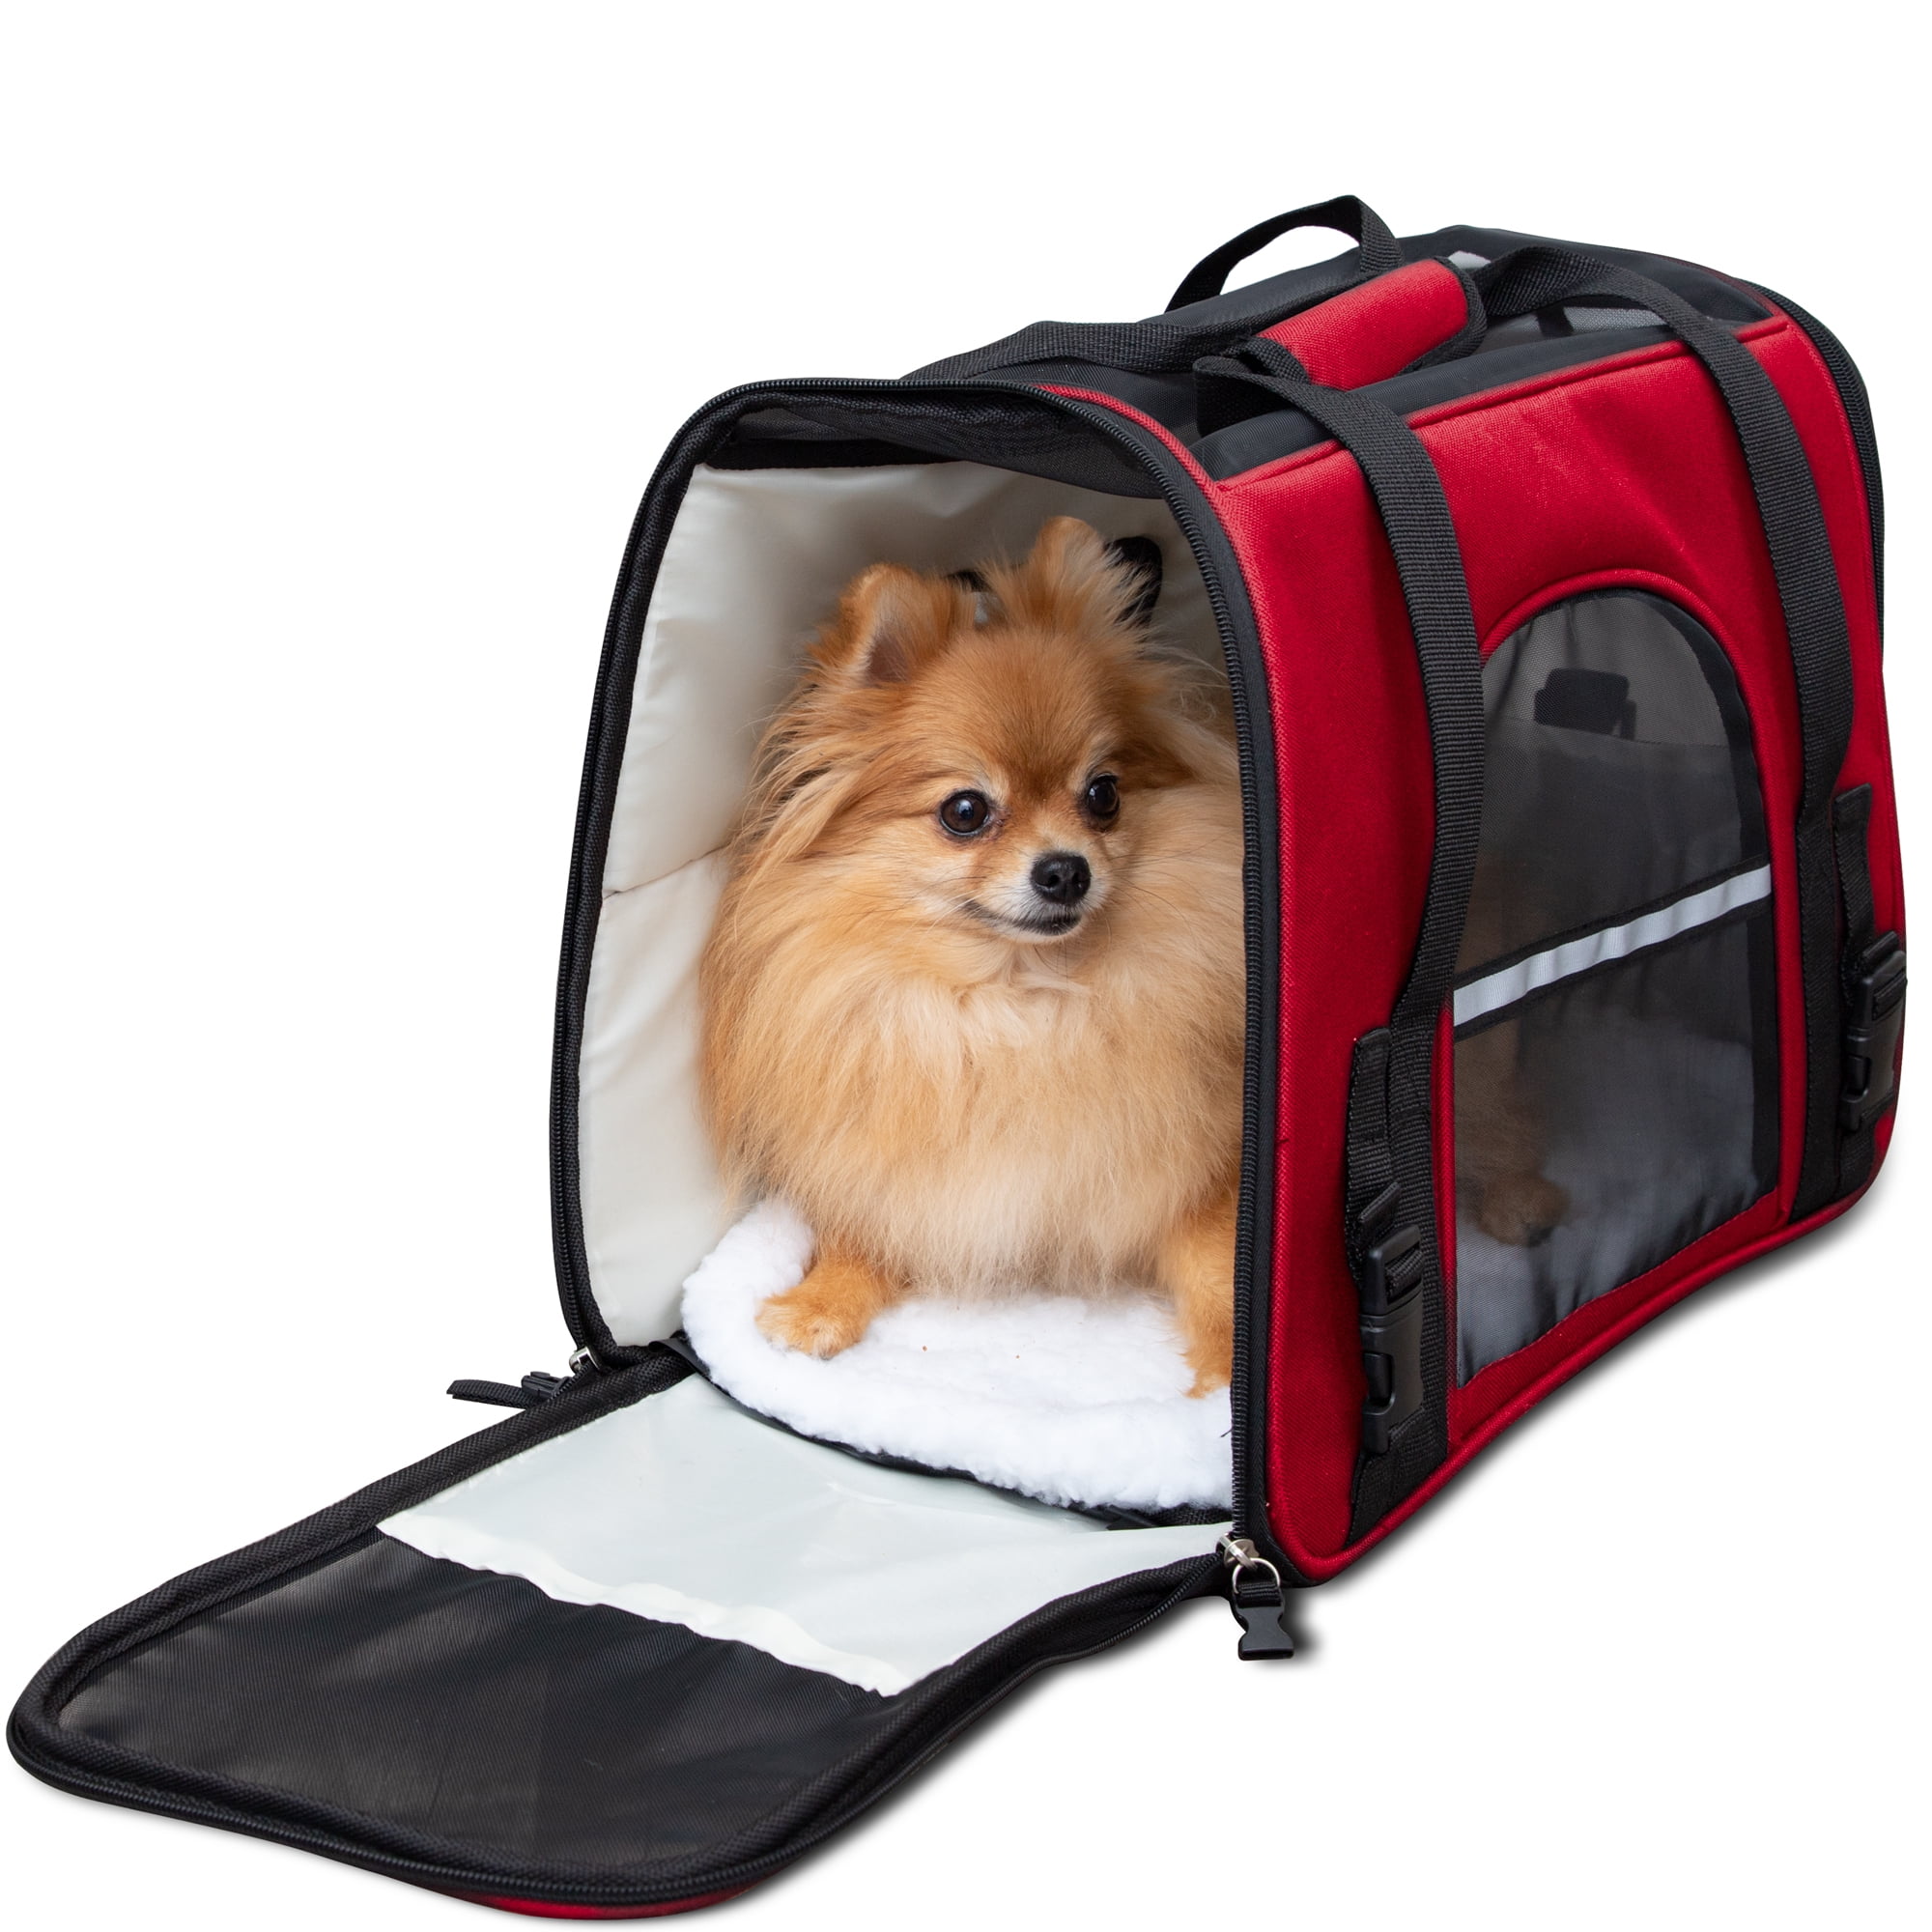 Petique AirPaws Designer Dog Carrier TSA Approved, Ideal For Small Dogs &  Cats Up To 10 Lbs. Classic Old Floral Letter Pattern, Drop Delivery HO  OTY5O. From Homeindustry, $145.63